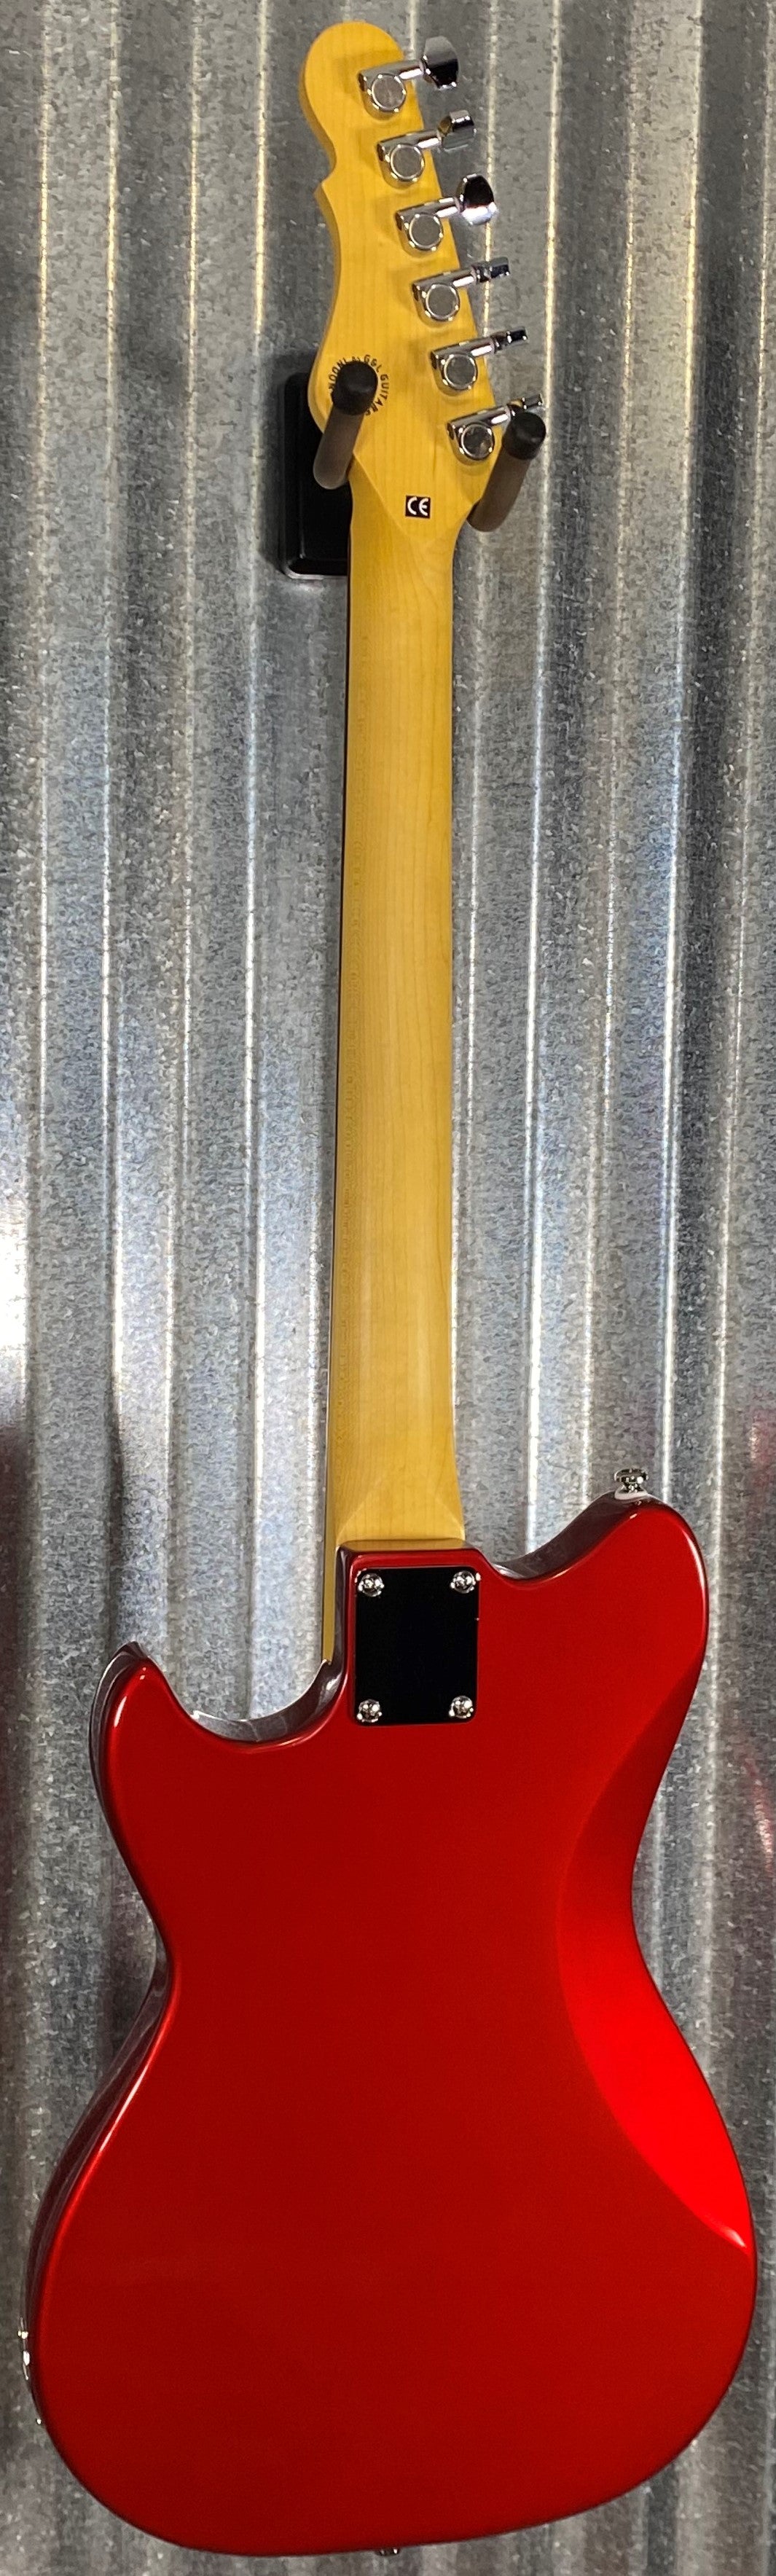 G&L Tribute Fallout Candy Apple Red Guitar #4582